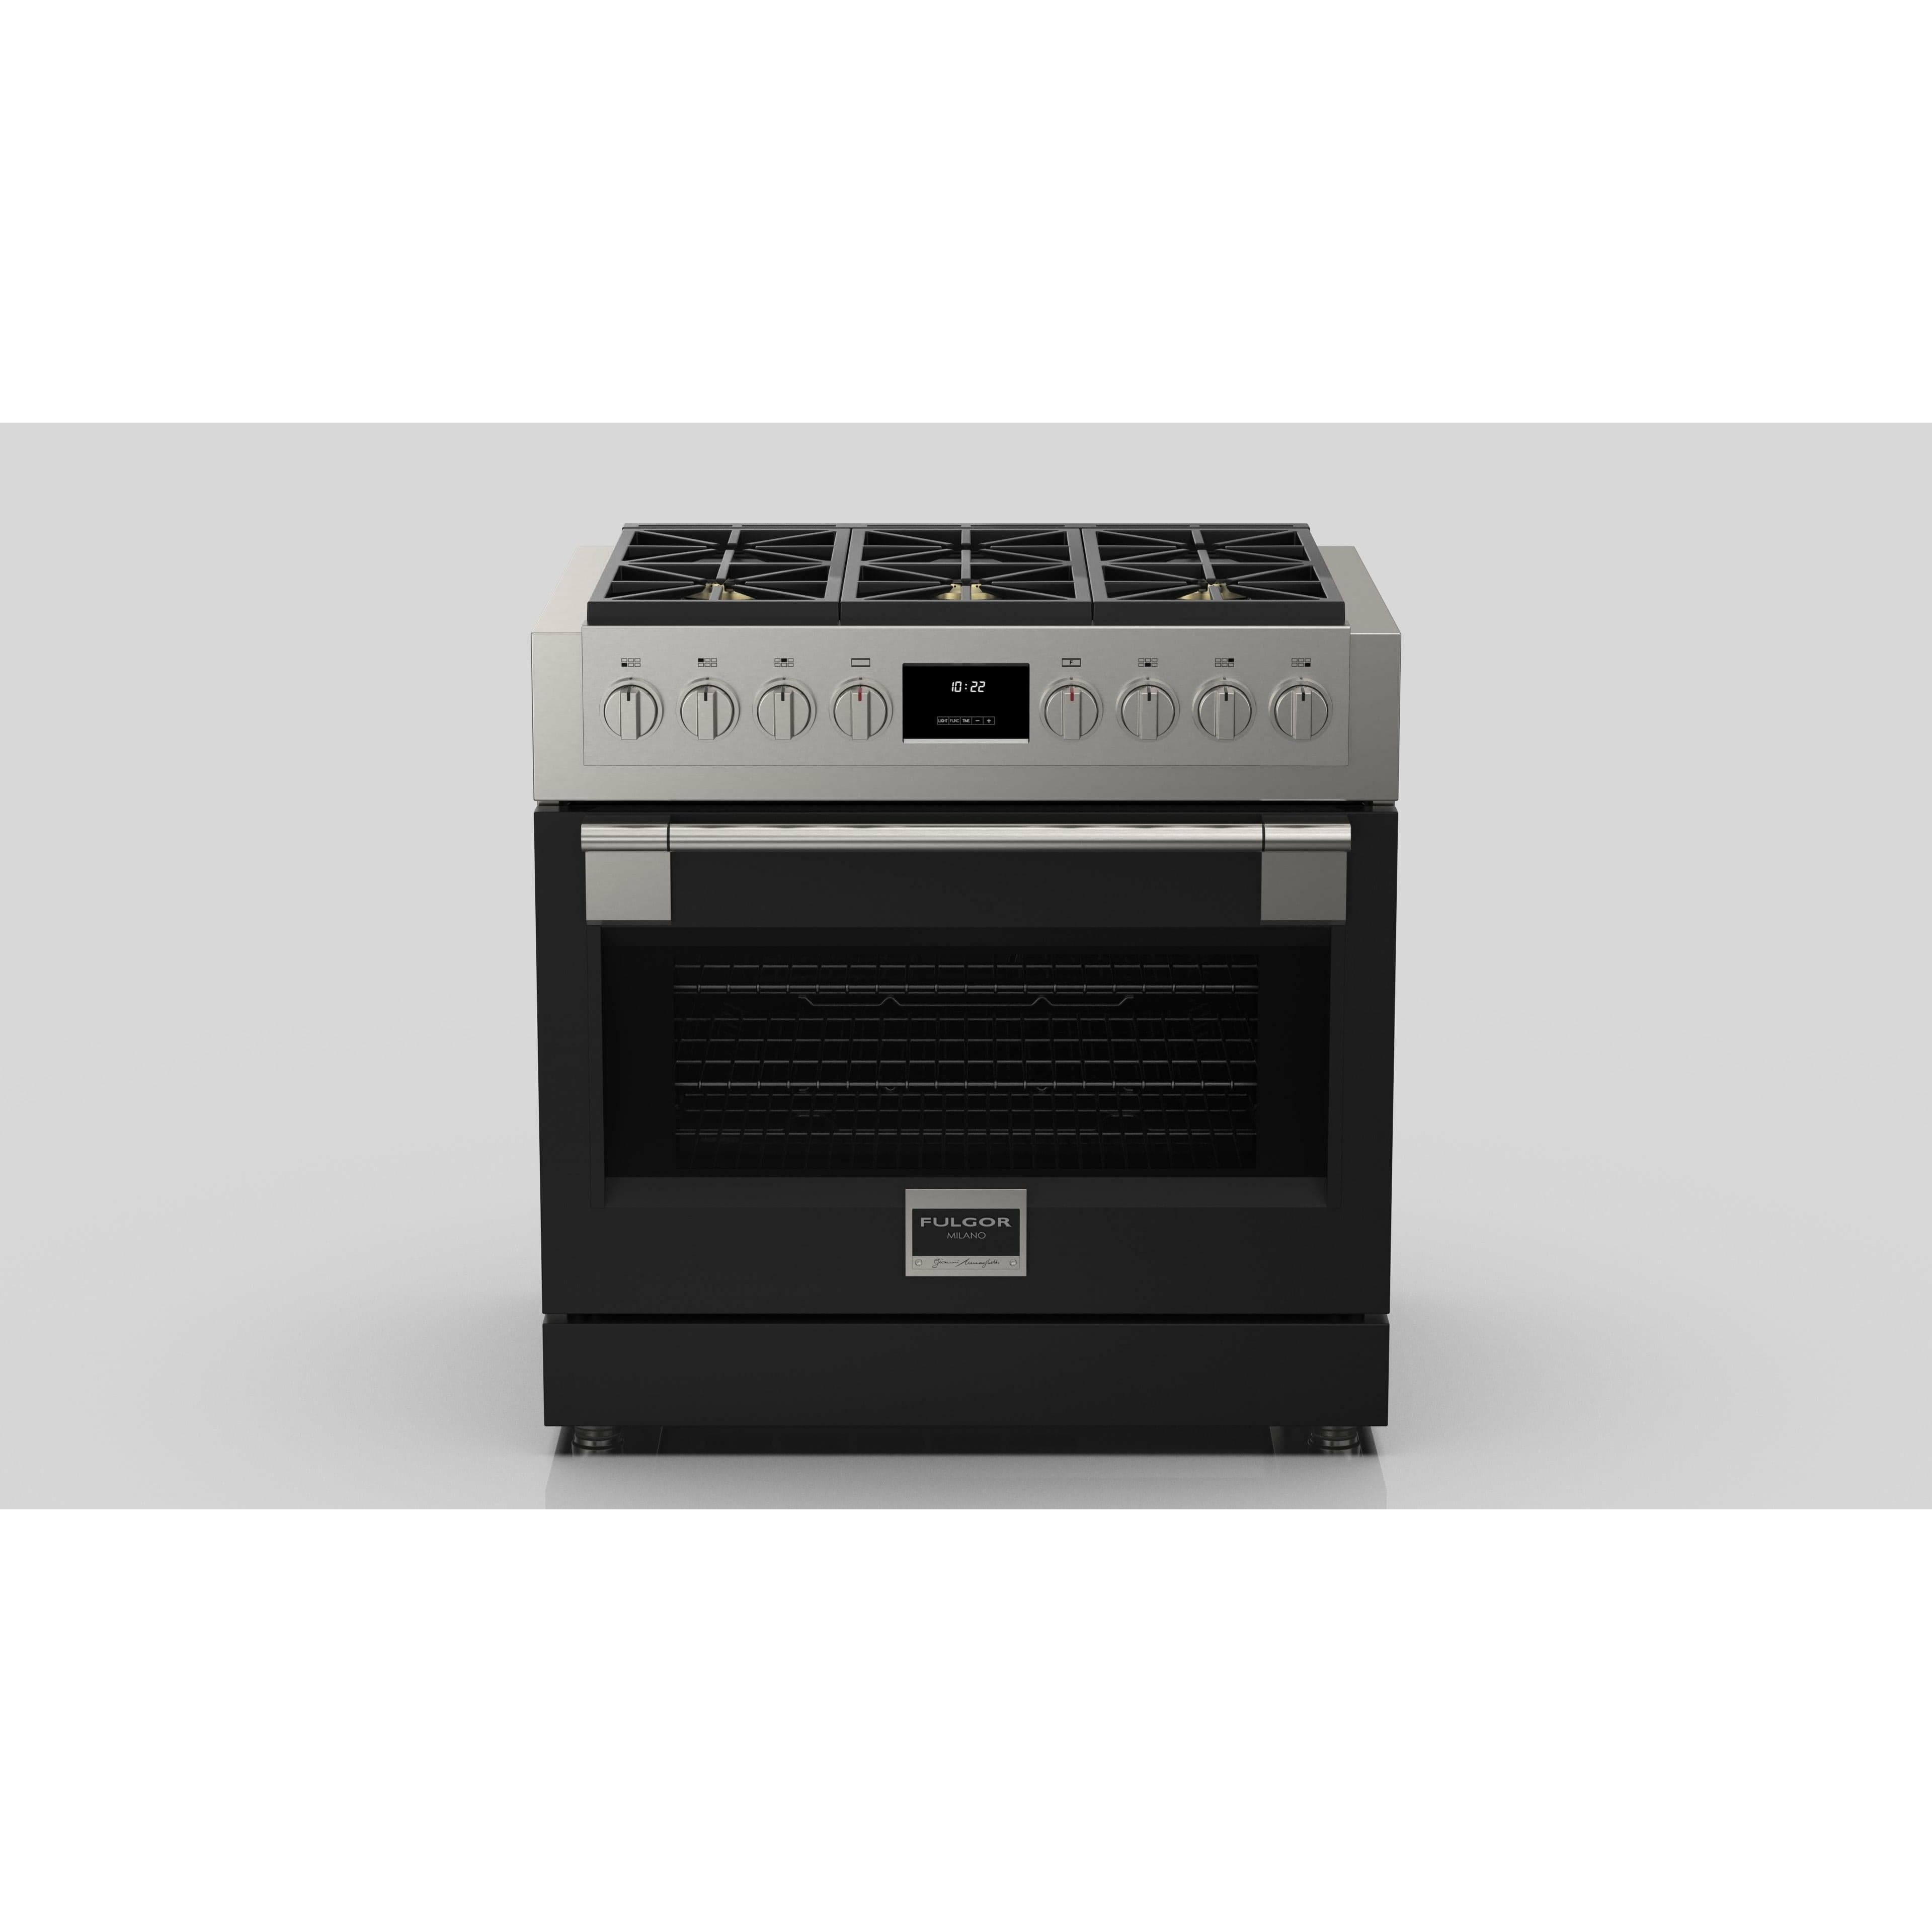 Fulgor Milano 36" Professional Gas Range with 6 Dual-Flame Burners, 5.7 cu. ft. Capacity, Stainless Steel - F6PGR366S2 Ranges F6PGR366S2 +PDRKIT36MB Luxury Appliances Direct